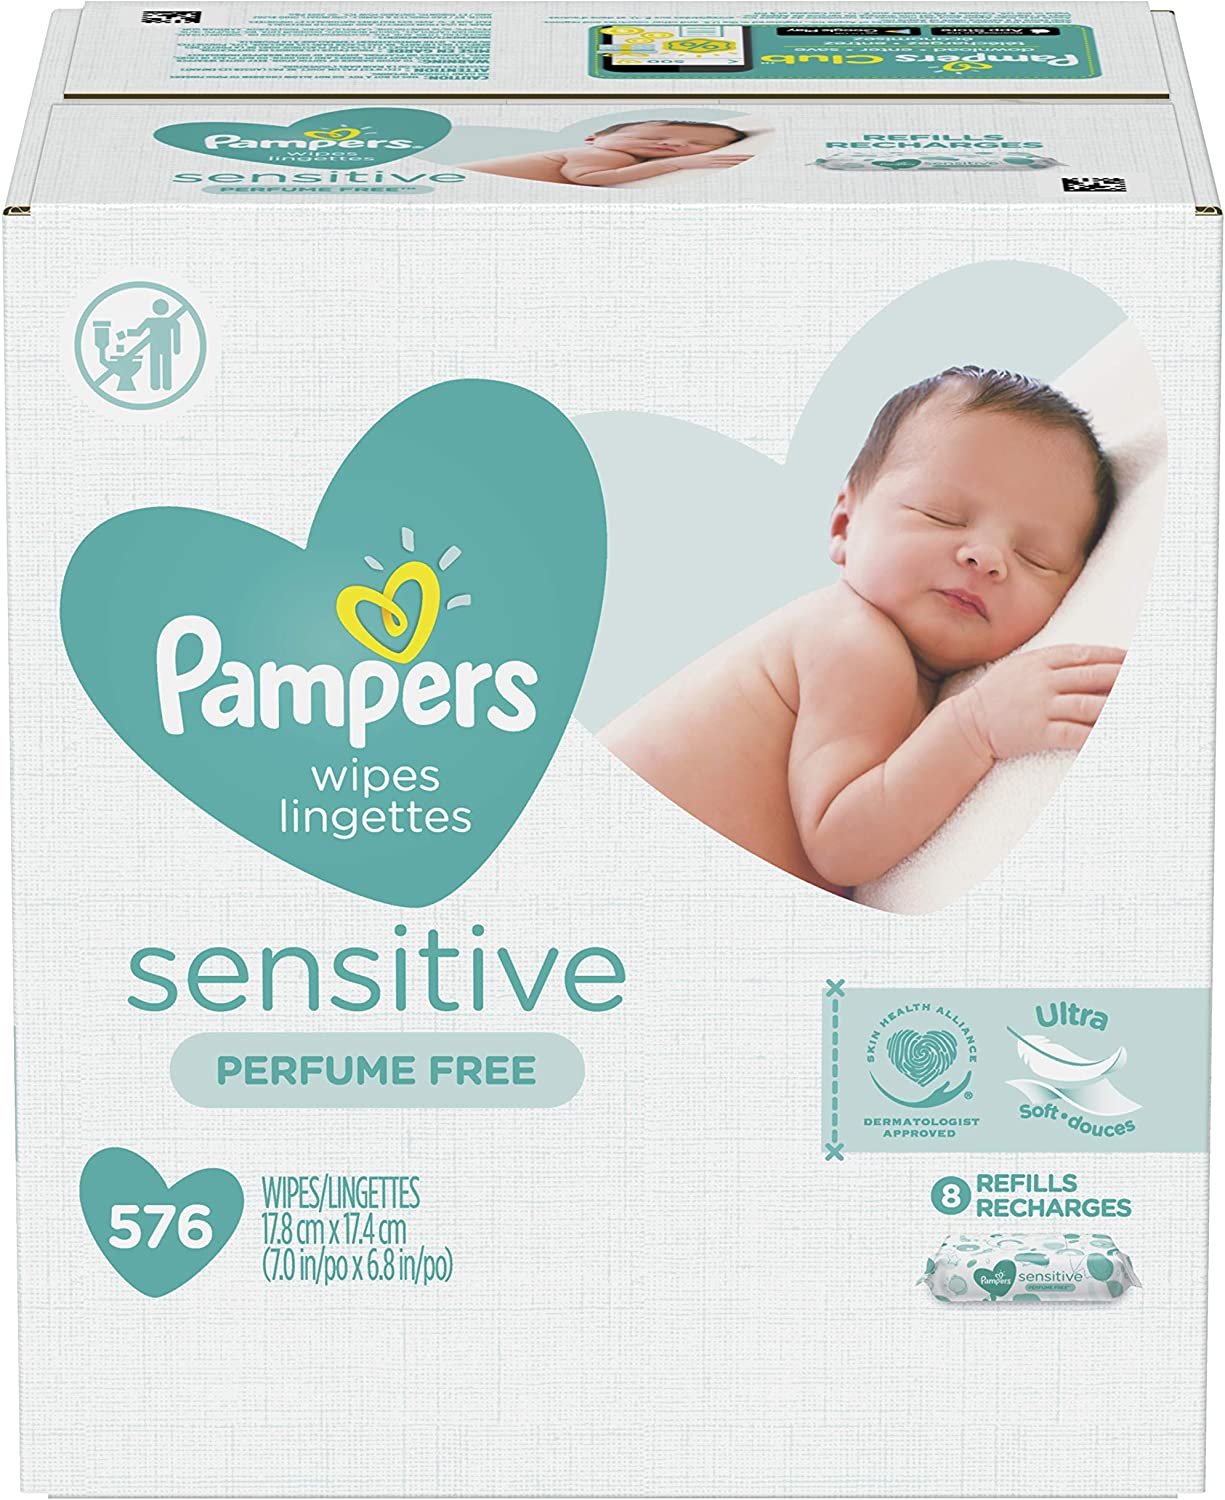 Baby Wipes, Pampers Sensitive Water Based Baby Diaper Wipes, 576